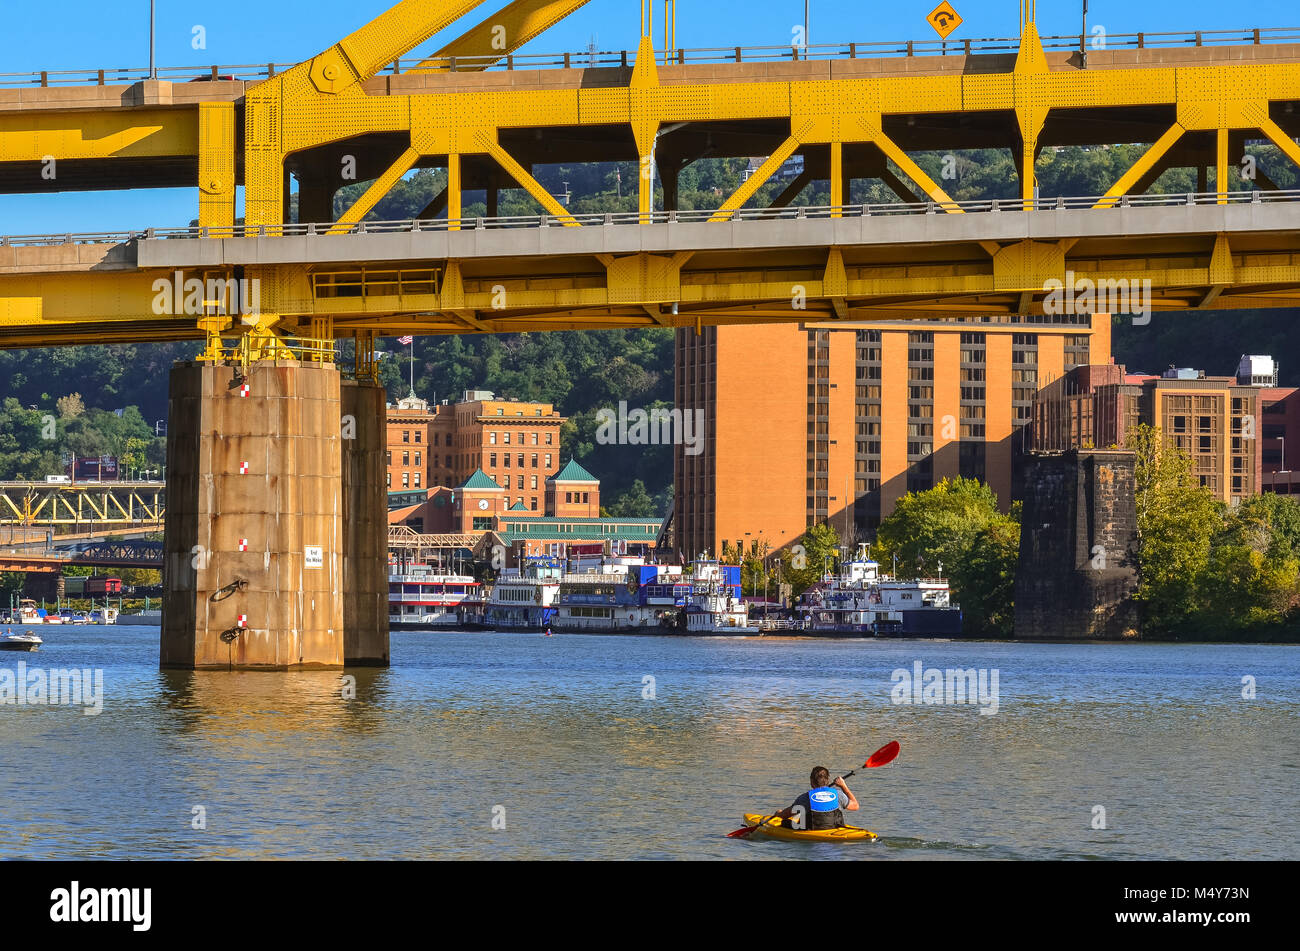 A lone man rows a kayak on the Ohio River under a yellow bridge in Pittsburgh, Pennsylvania. Stock Photo